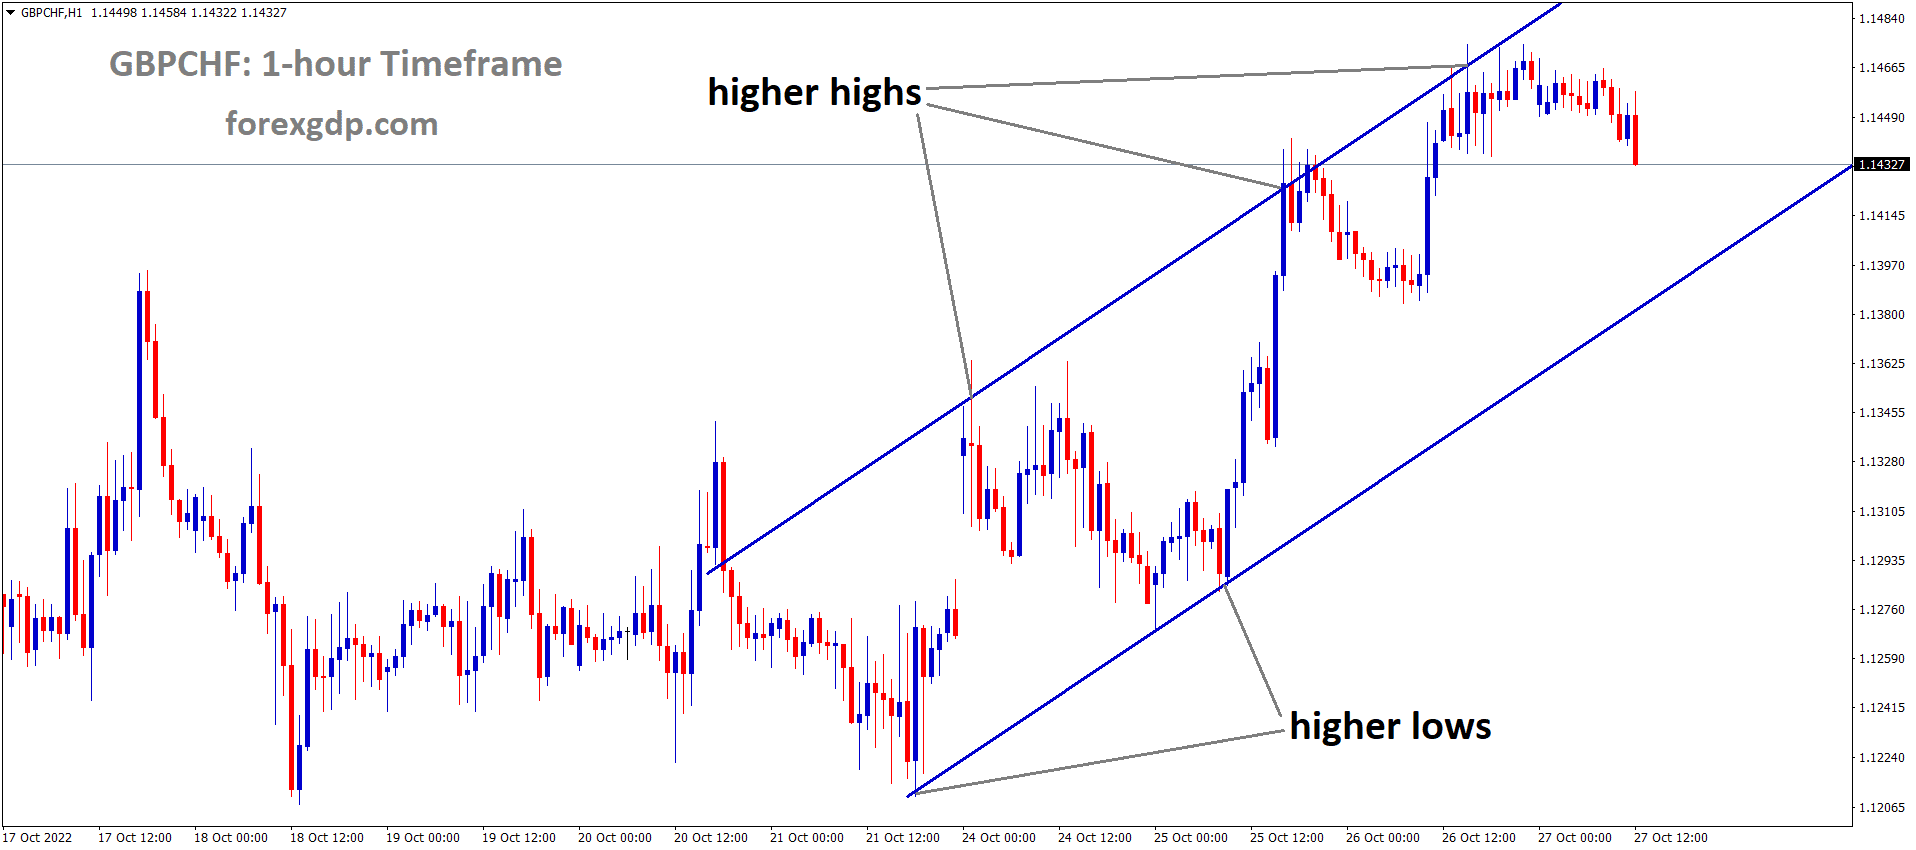 GBPCHF is moving in an Ascending channel and the market has fallen from the higher high area of the channel